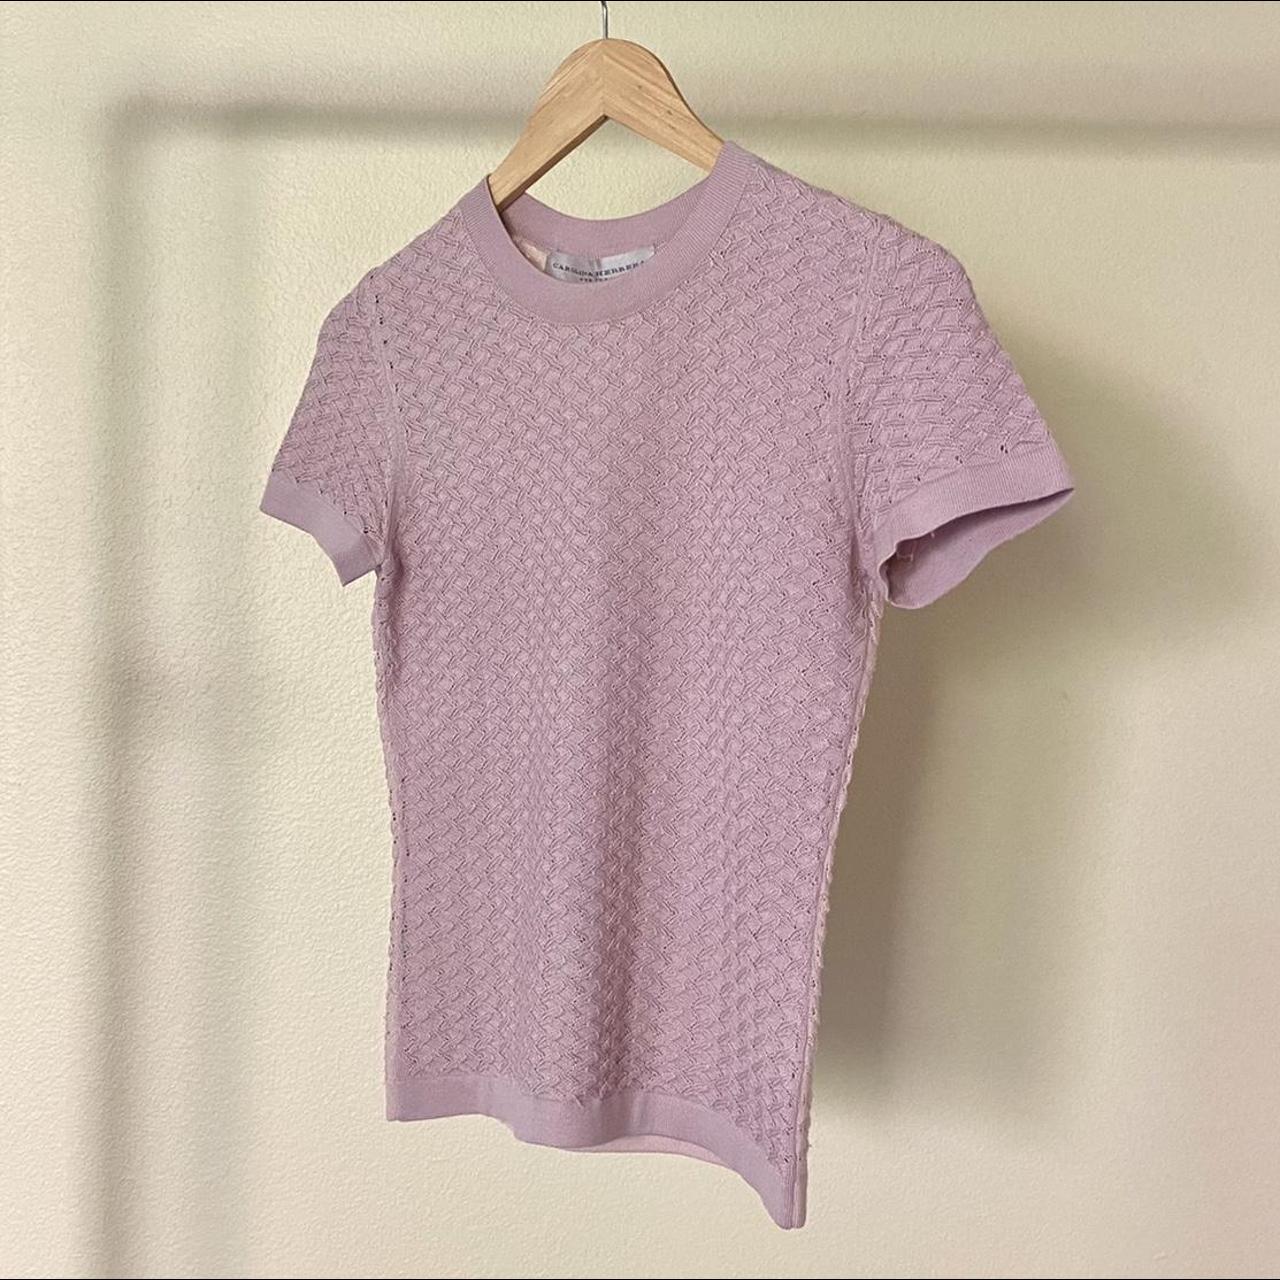 Product Image 2 - Luxurious designer cashmere tee top